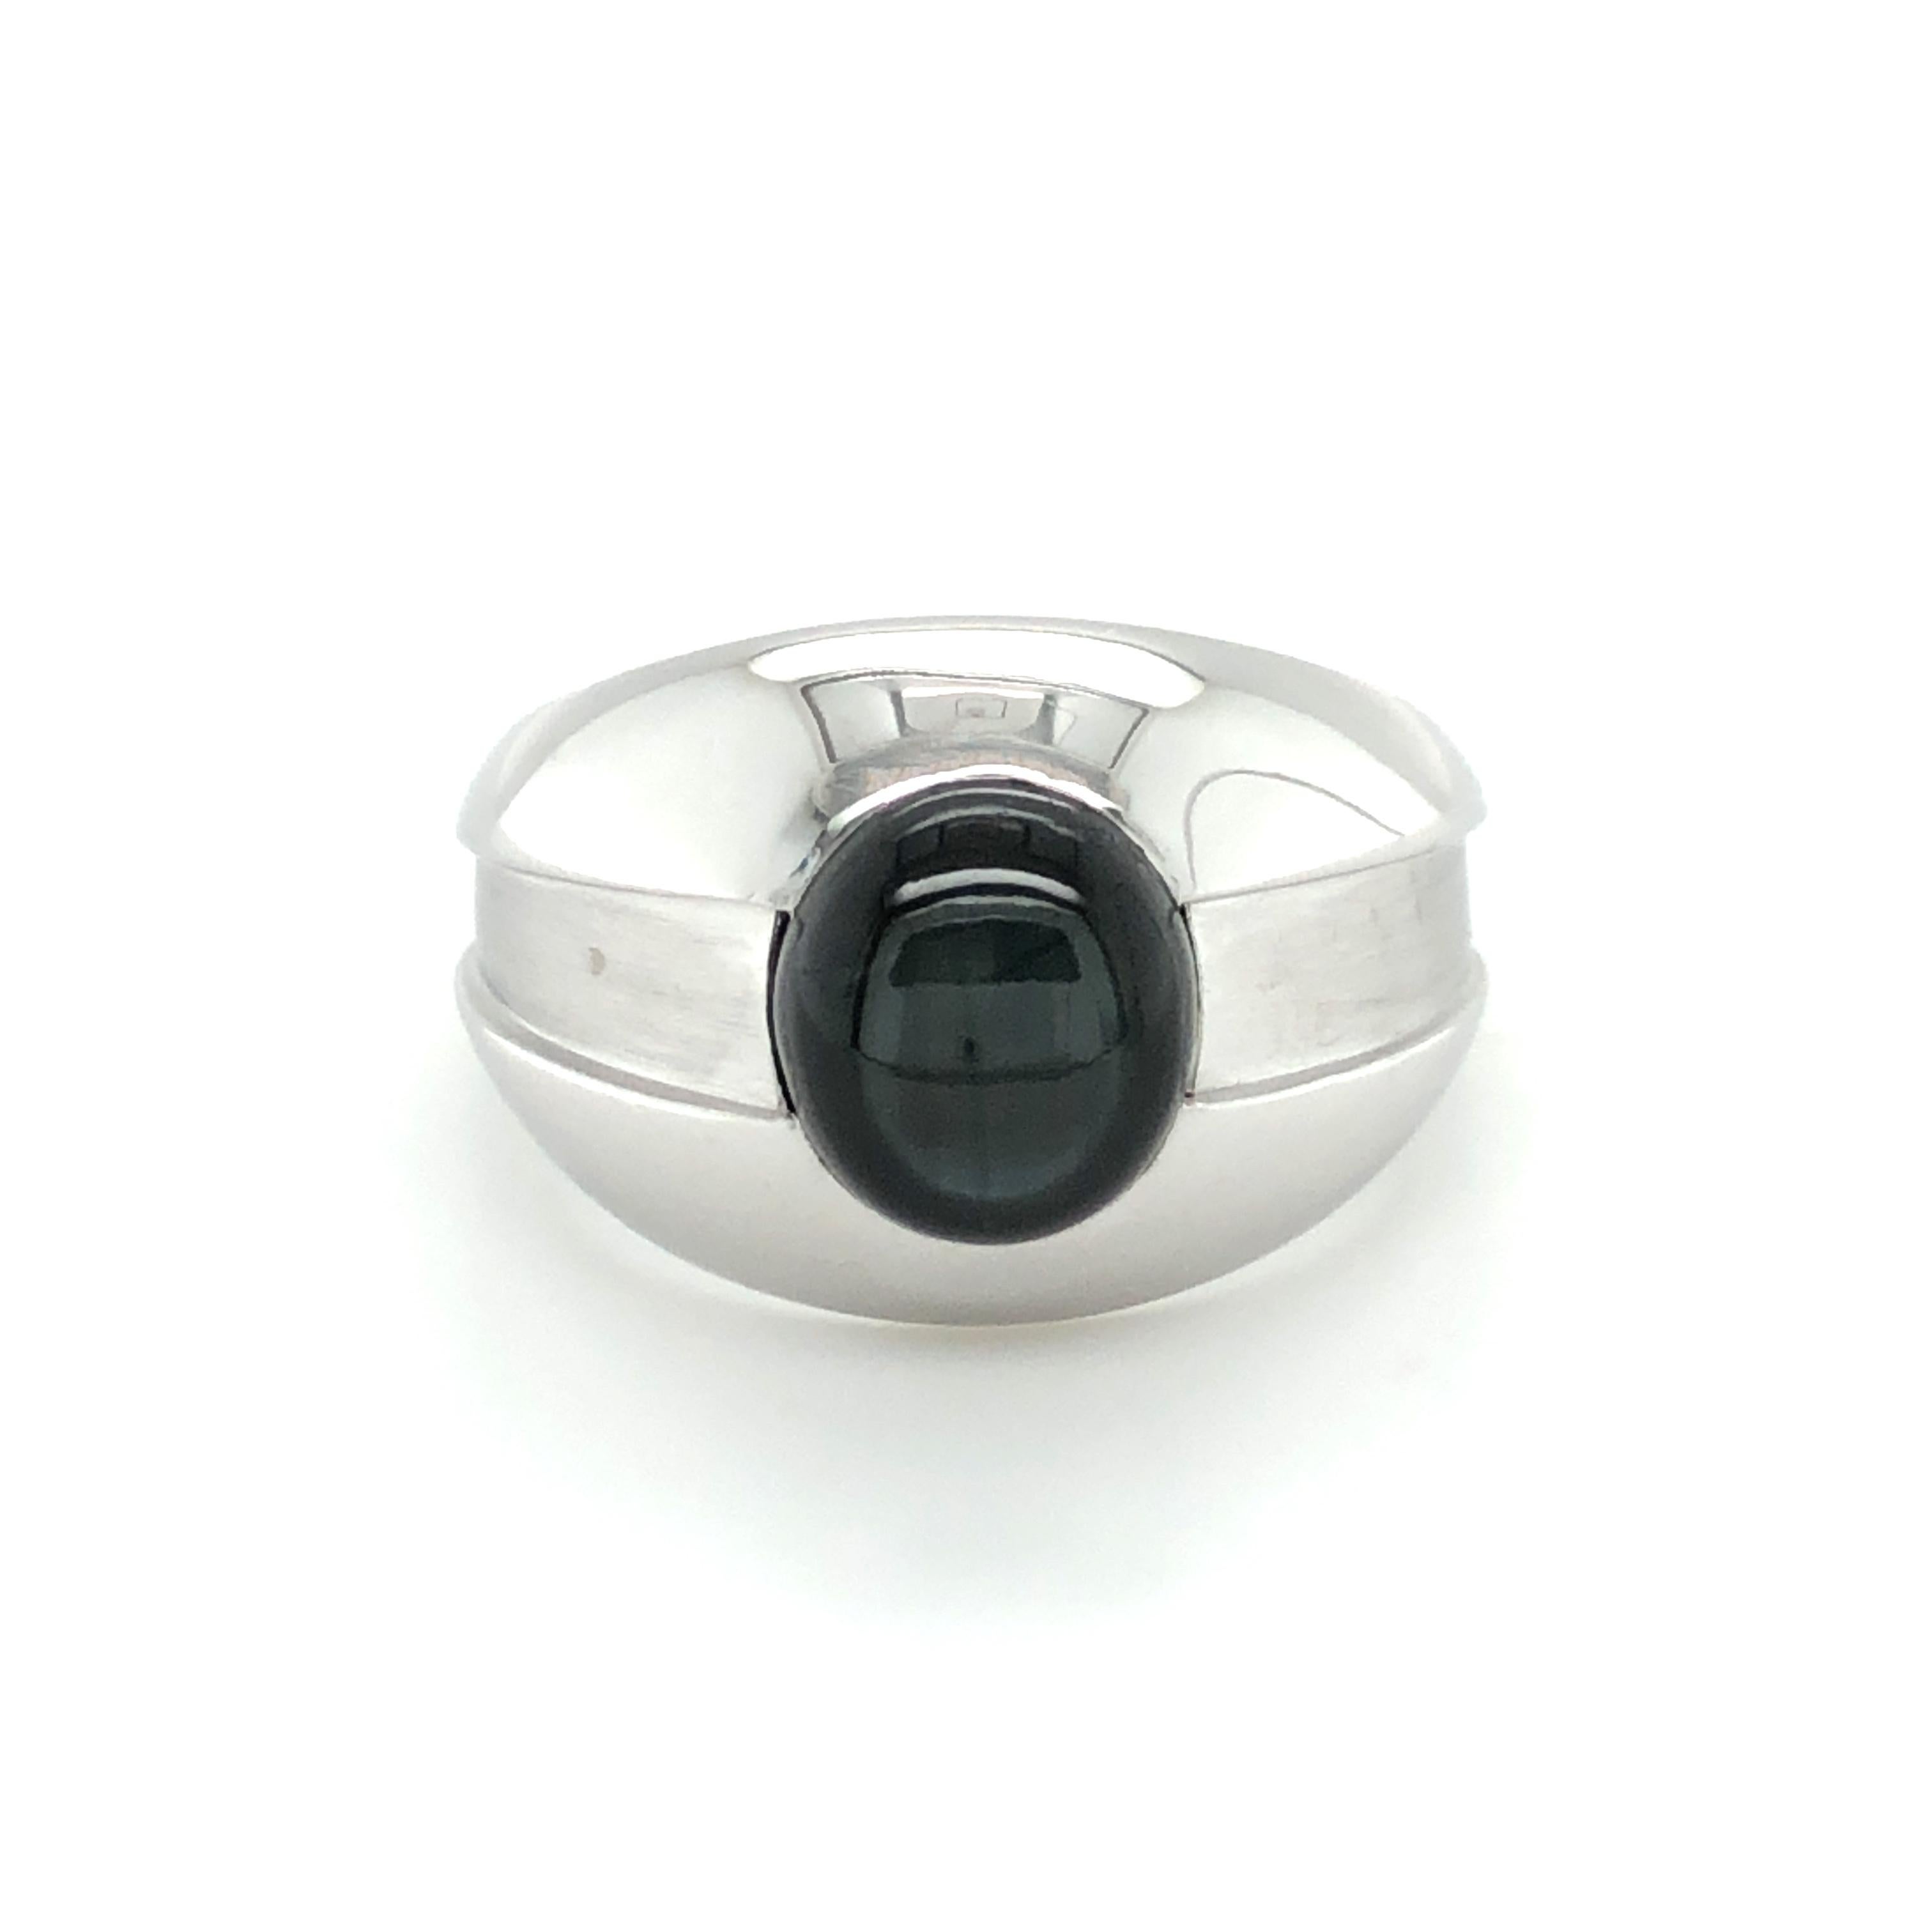 This elegant ring in 18 karat white gold by reknowned Swiss jeweller Gübelin is set with a cabochon-cut black star sapphire of 7.25 carats. The beautiful star sapphire captivates with a light bluish shimmer and a six-pointed star that gently